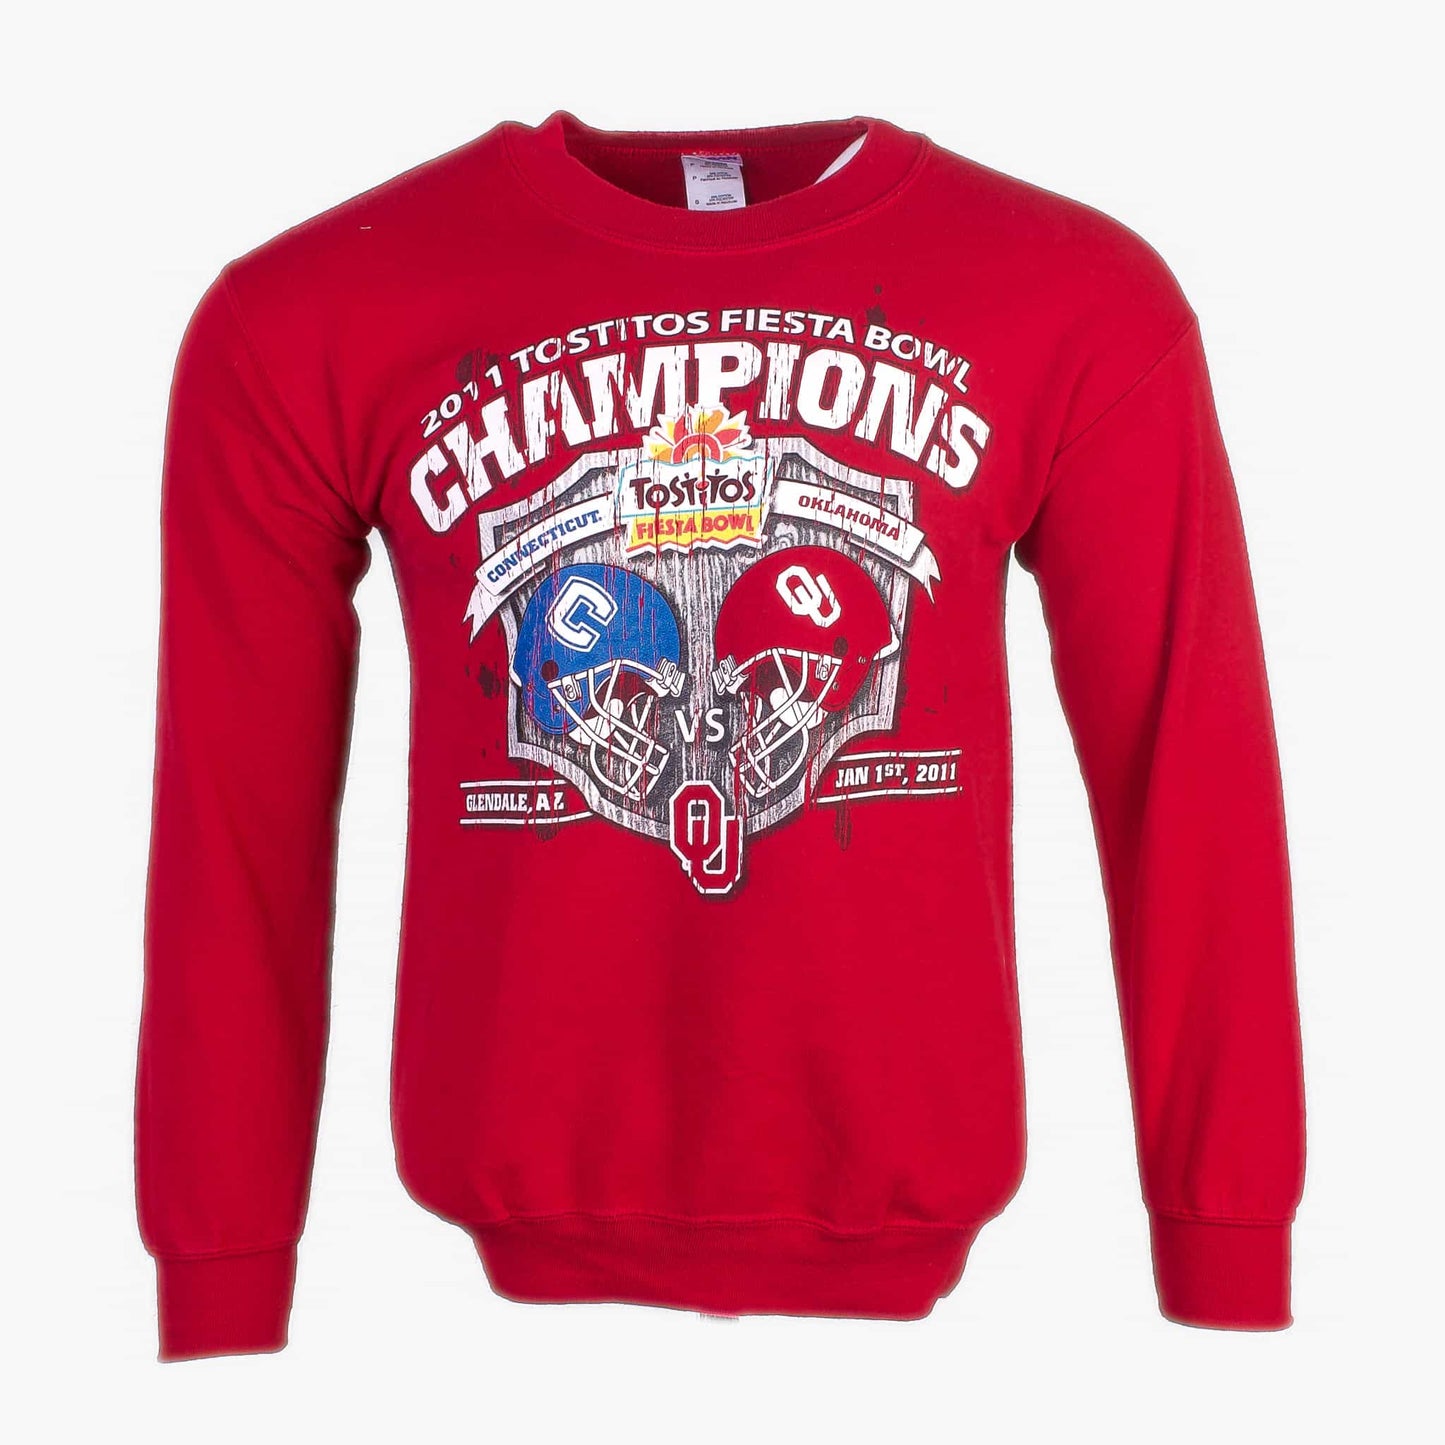 Vintage Tostito's Fiesta Bowl Graphic Sweatshirt - Red - American Madness